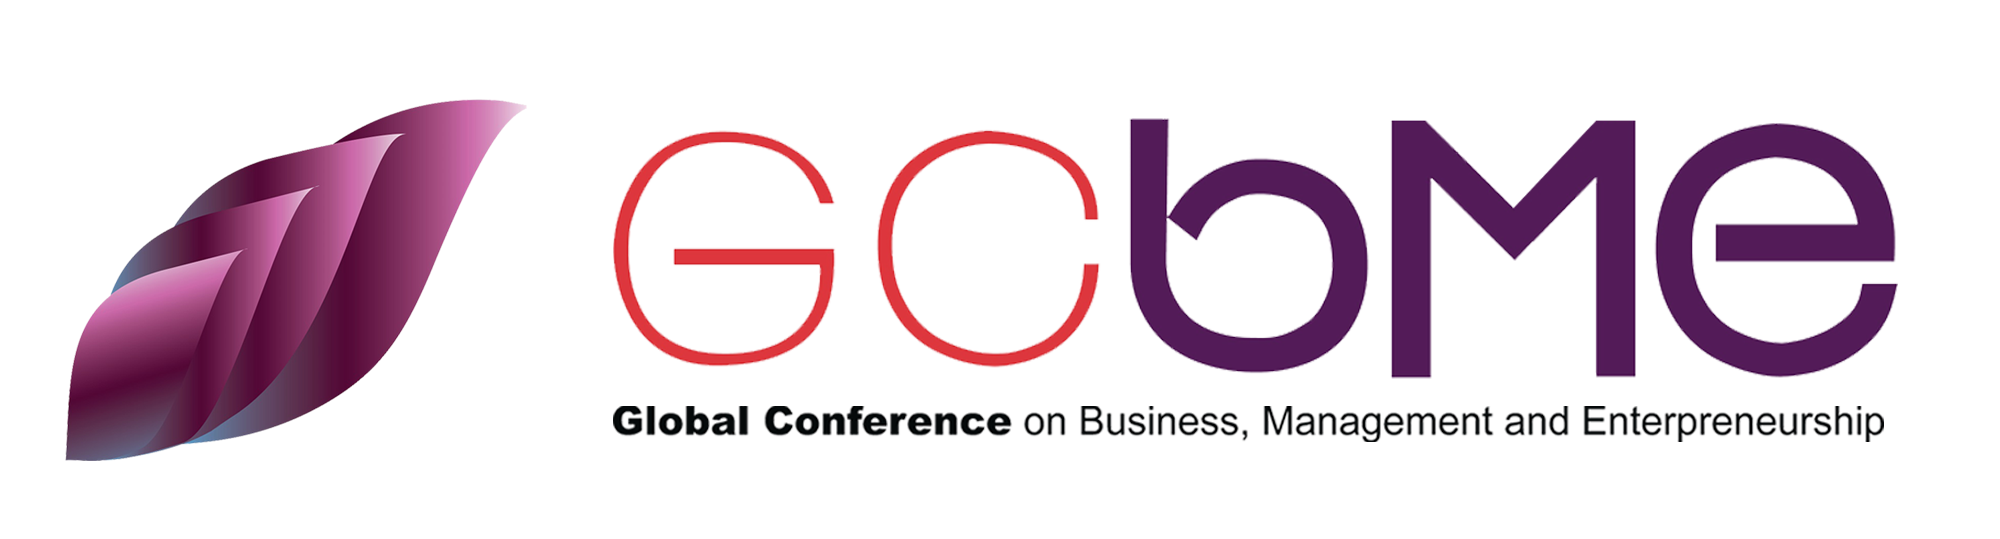 The 6th Global Conference Of Business Management and Entrepreneurship 2021